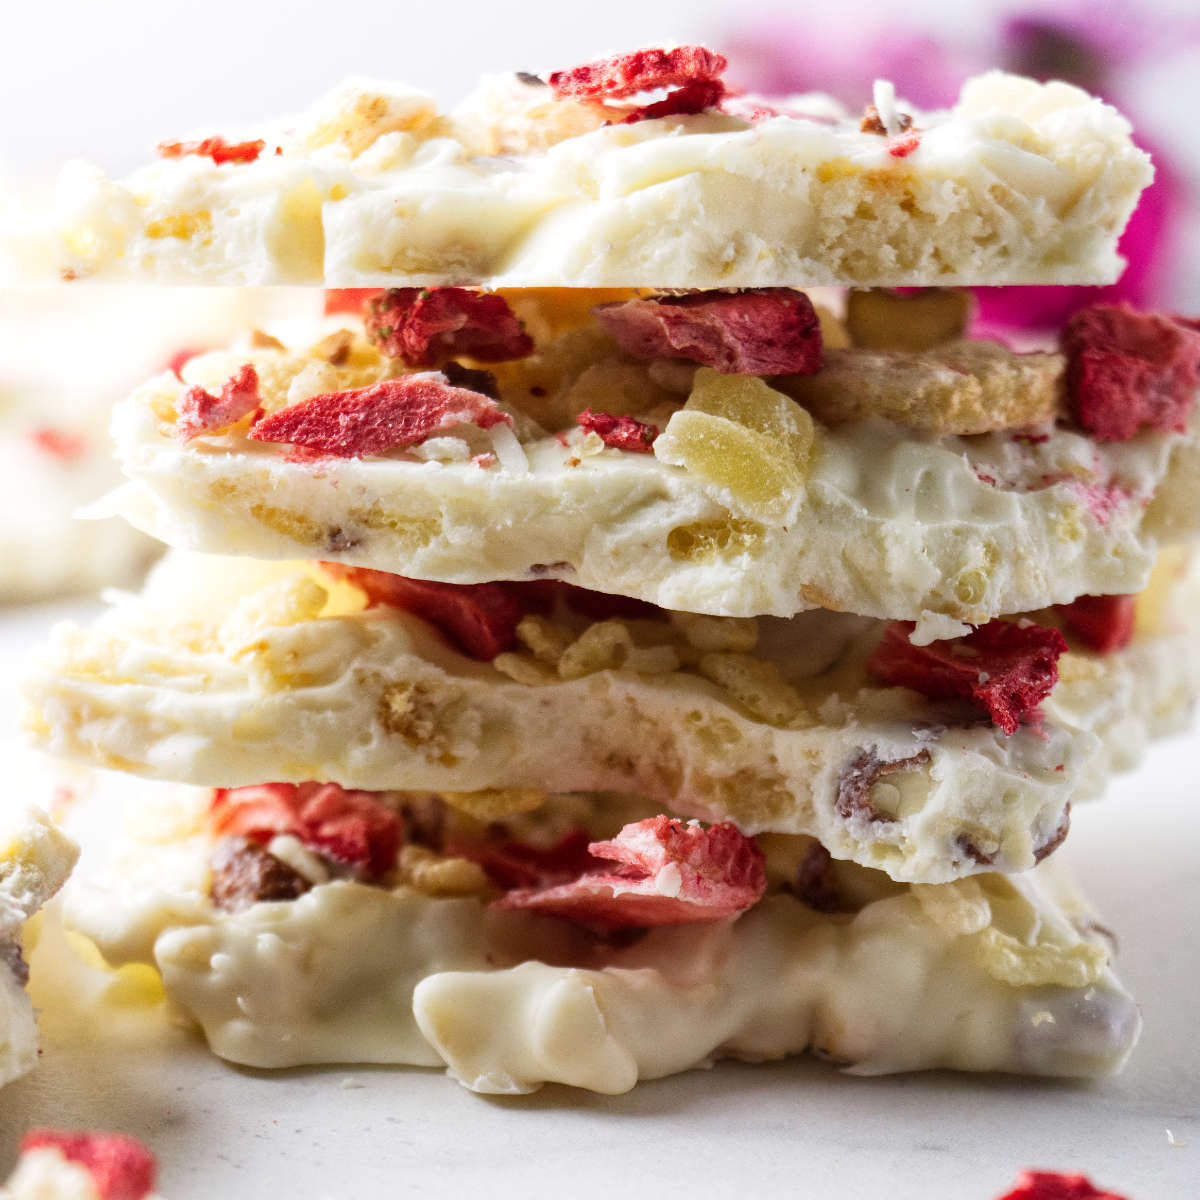 A stack of white chocolate bark with nuts and dried fruit.